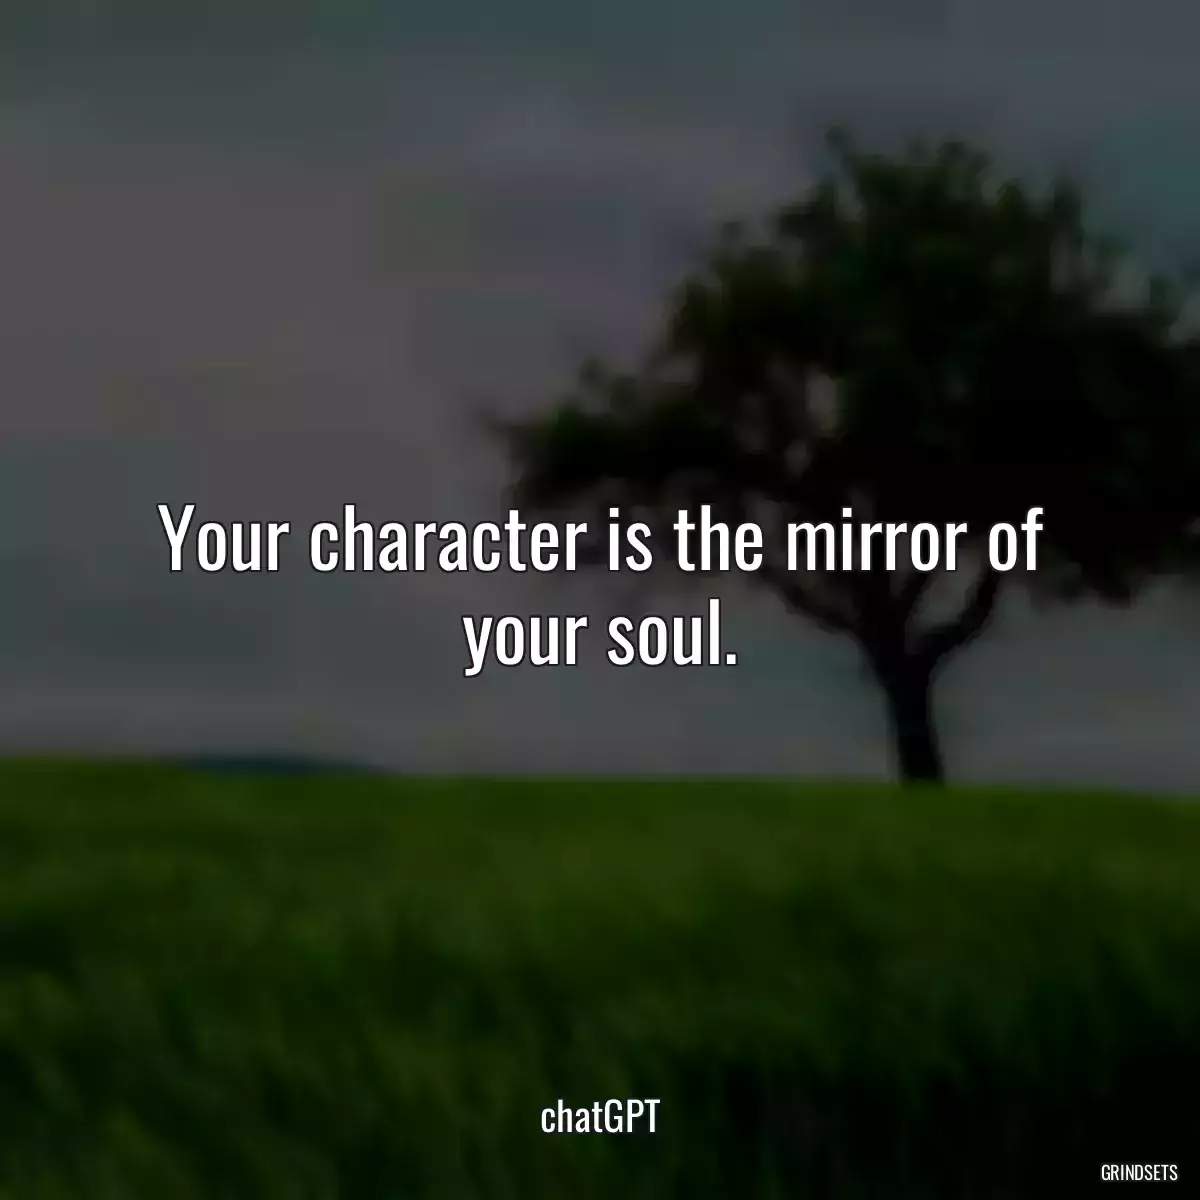 Your character is the mirror of your soul.